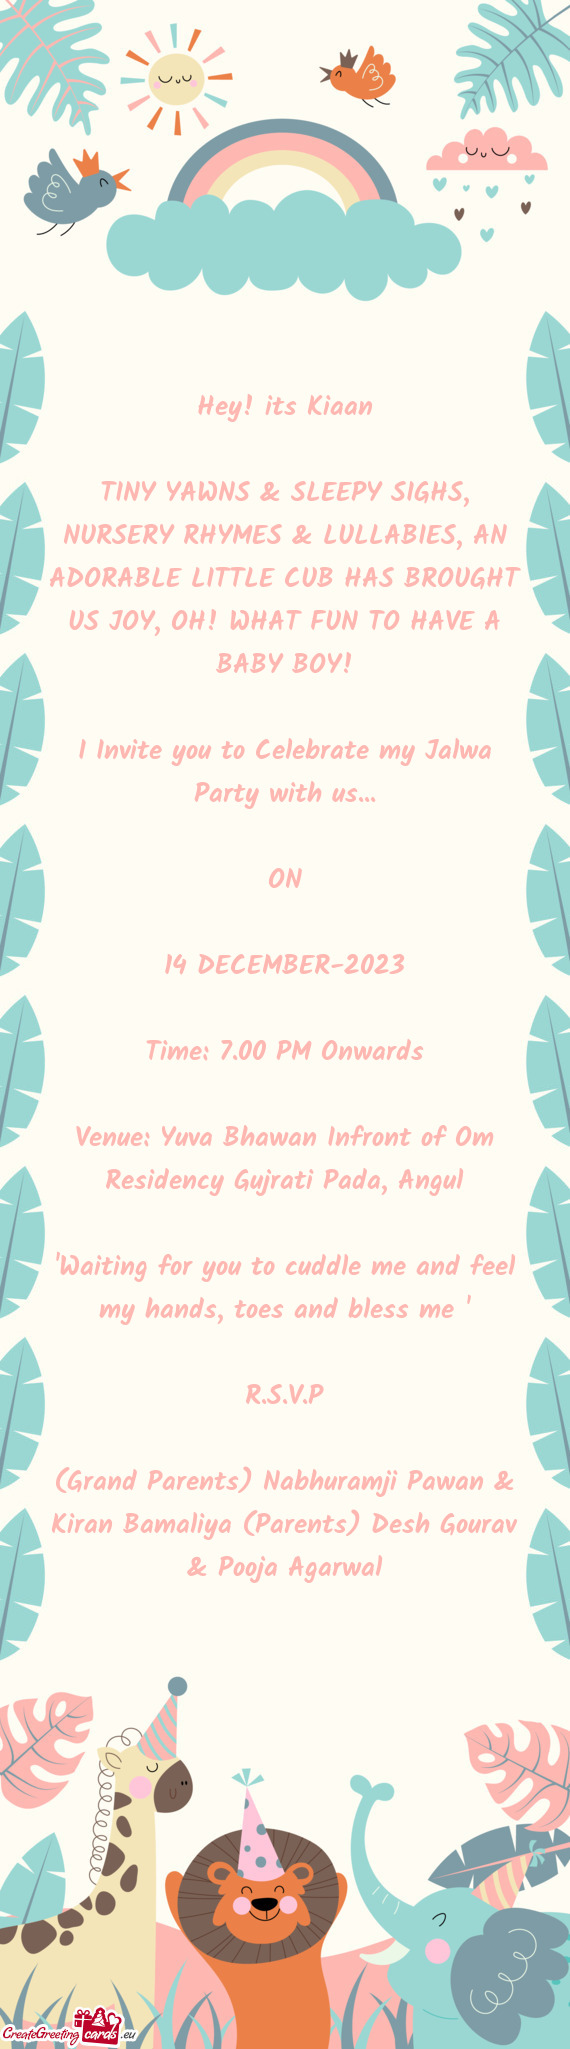 I Invite you to Celebrate my Jalwa Party with us